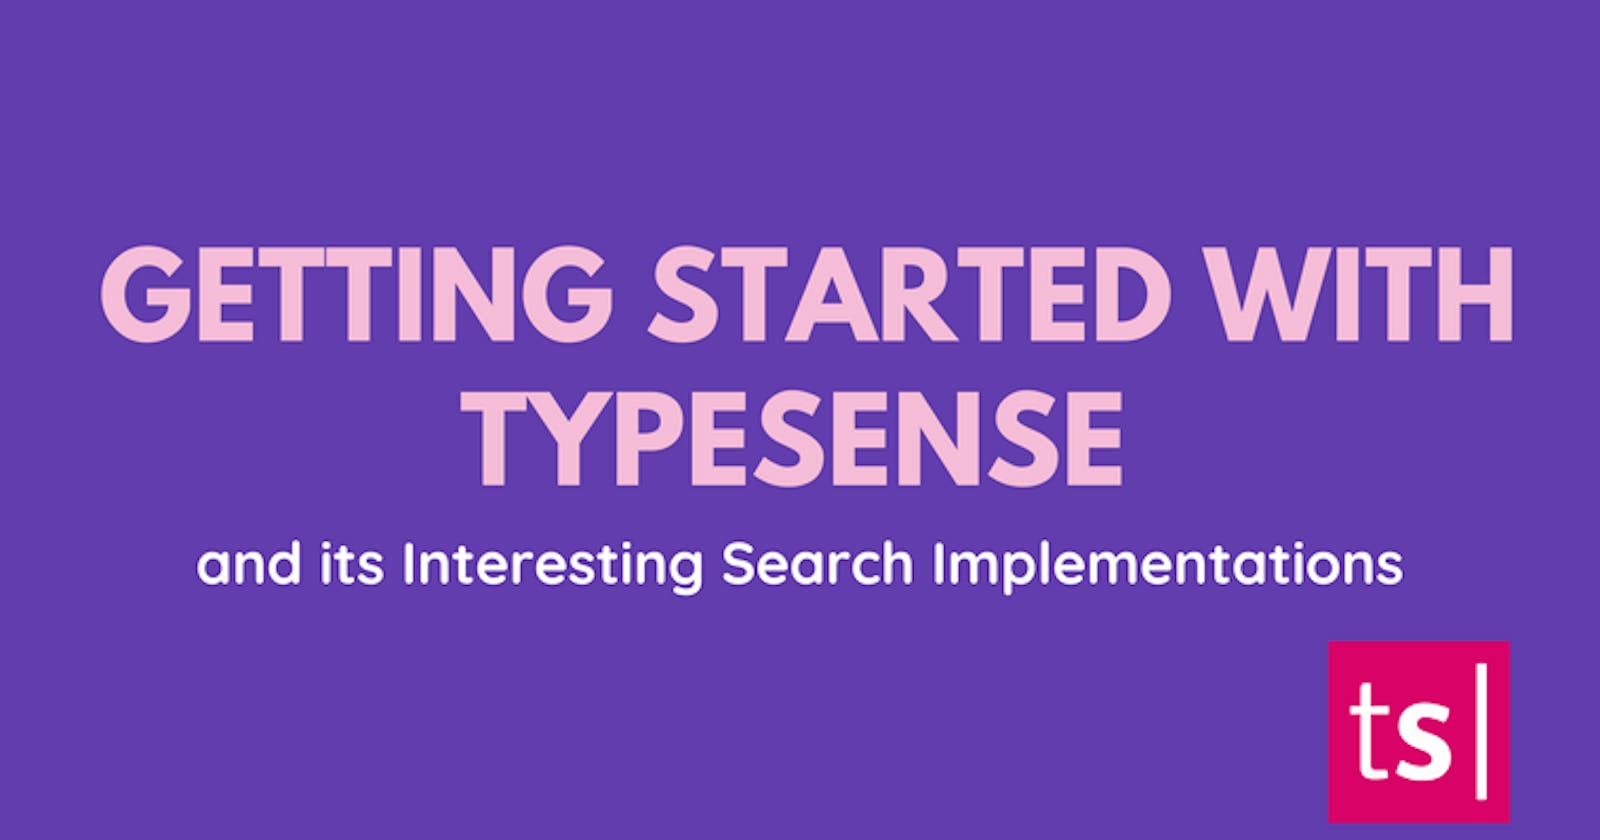 Getting Started with Typesense and its Interesting Search Implementations